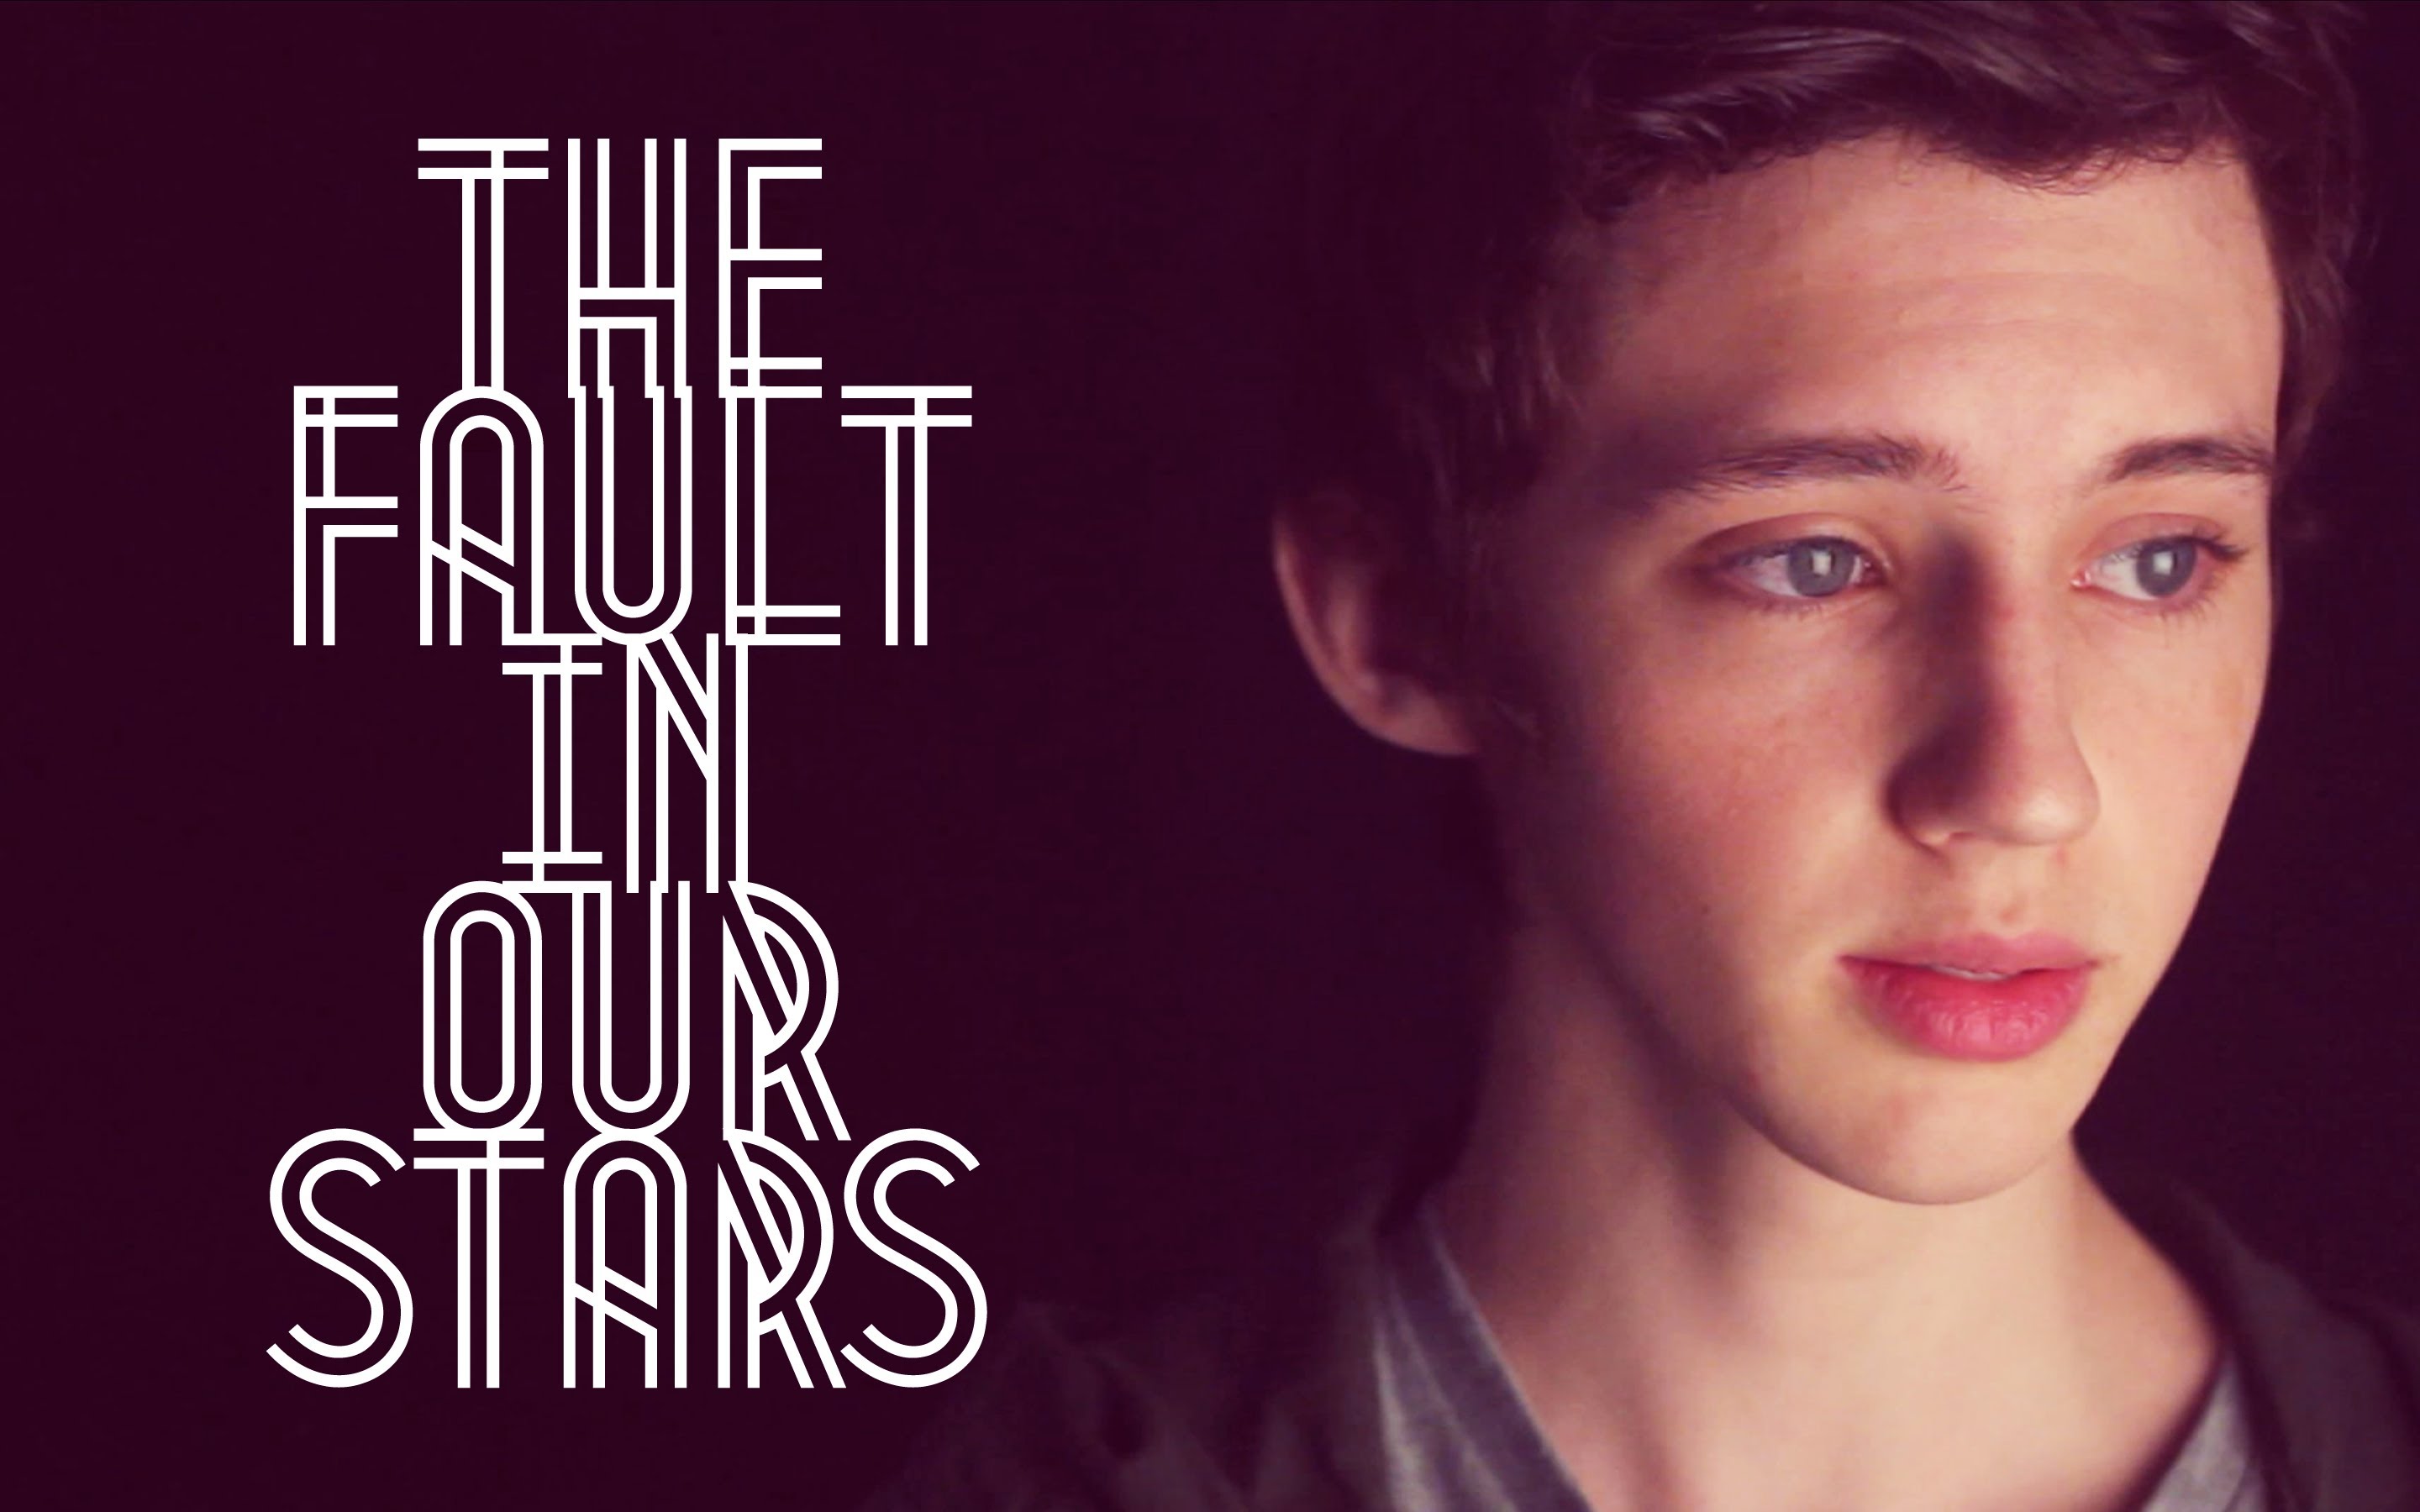 Troye Sivan – The Fault In Our Stars